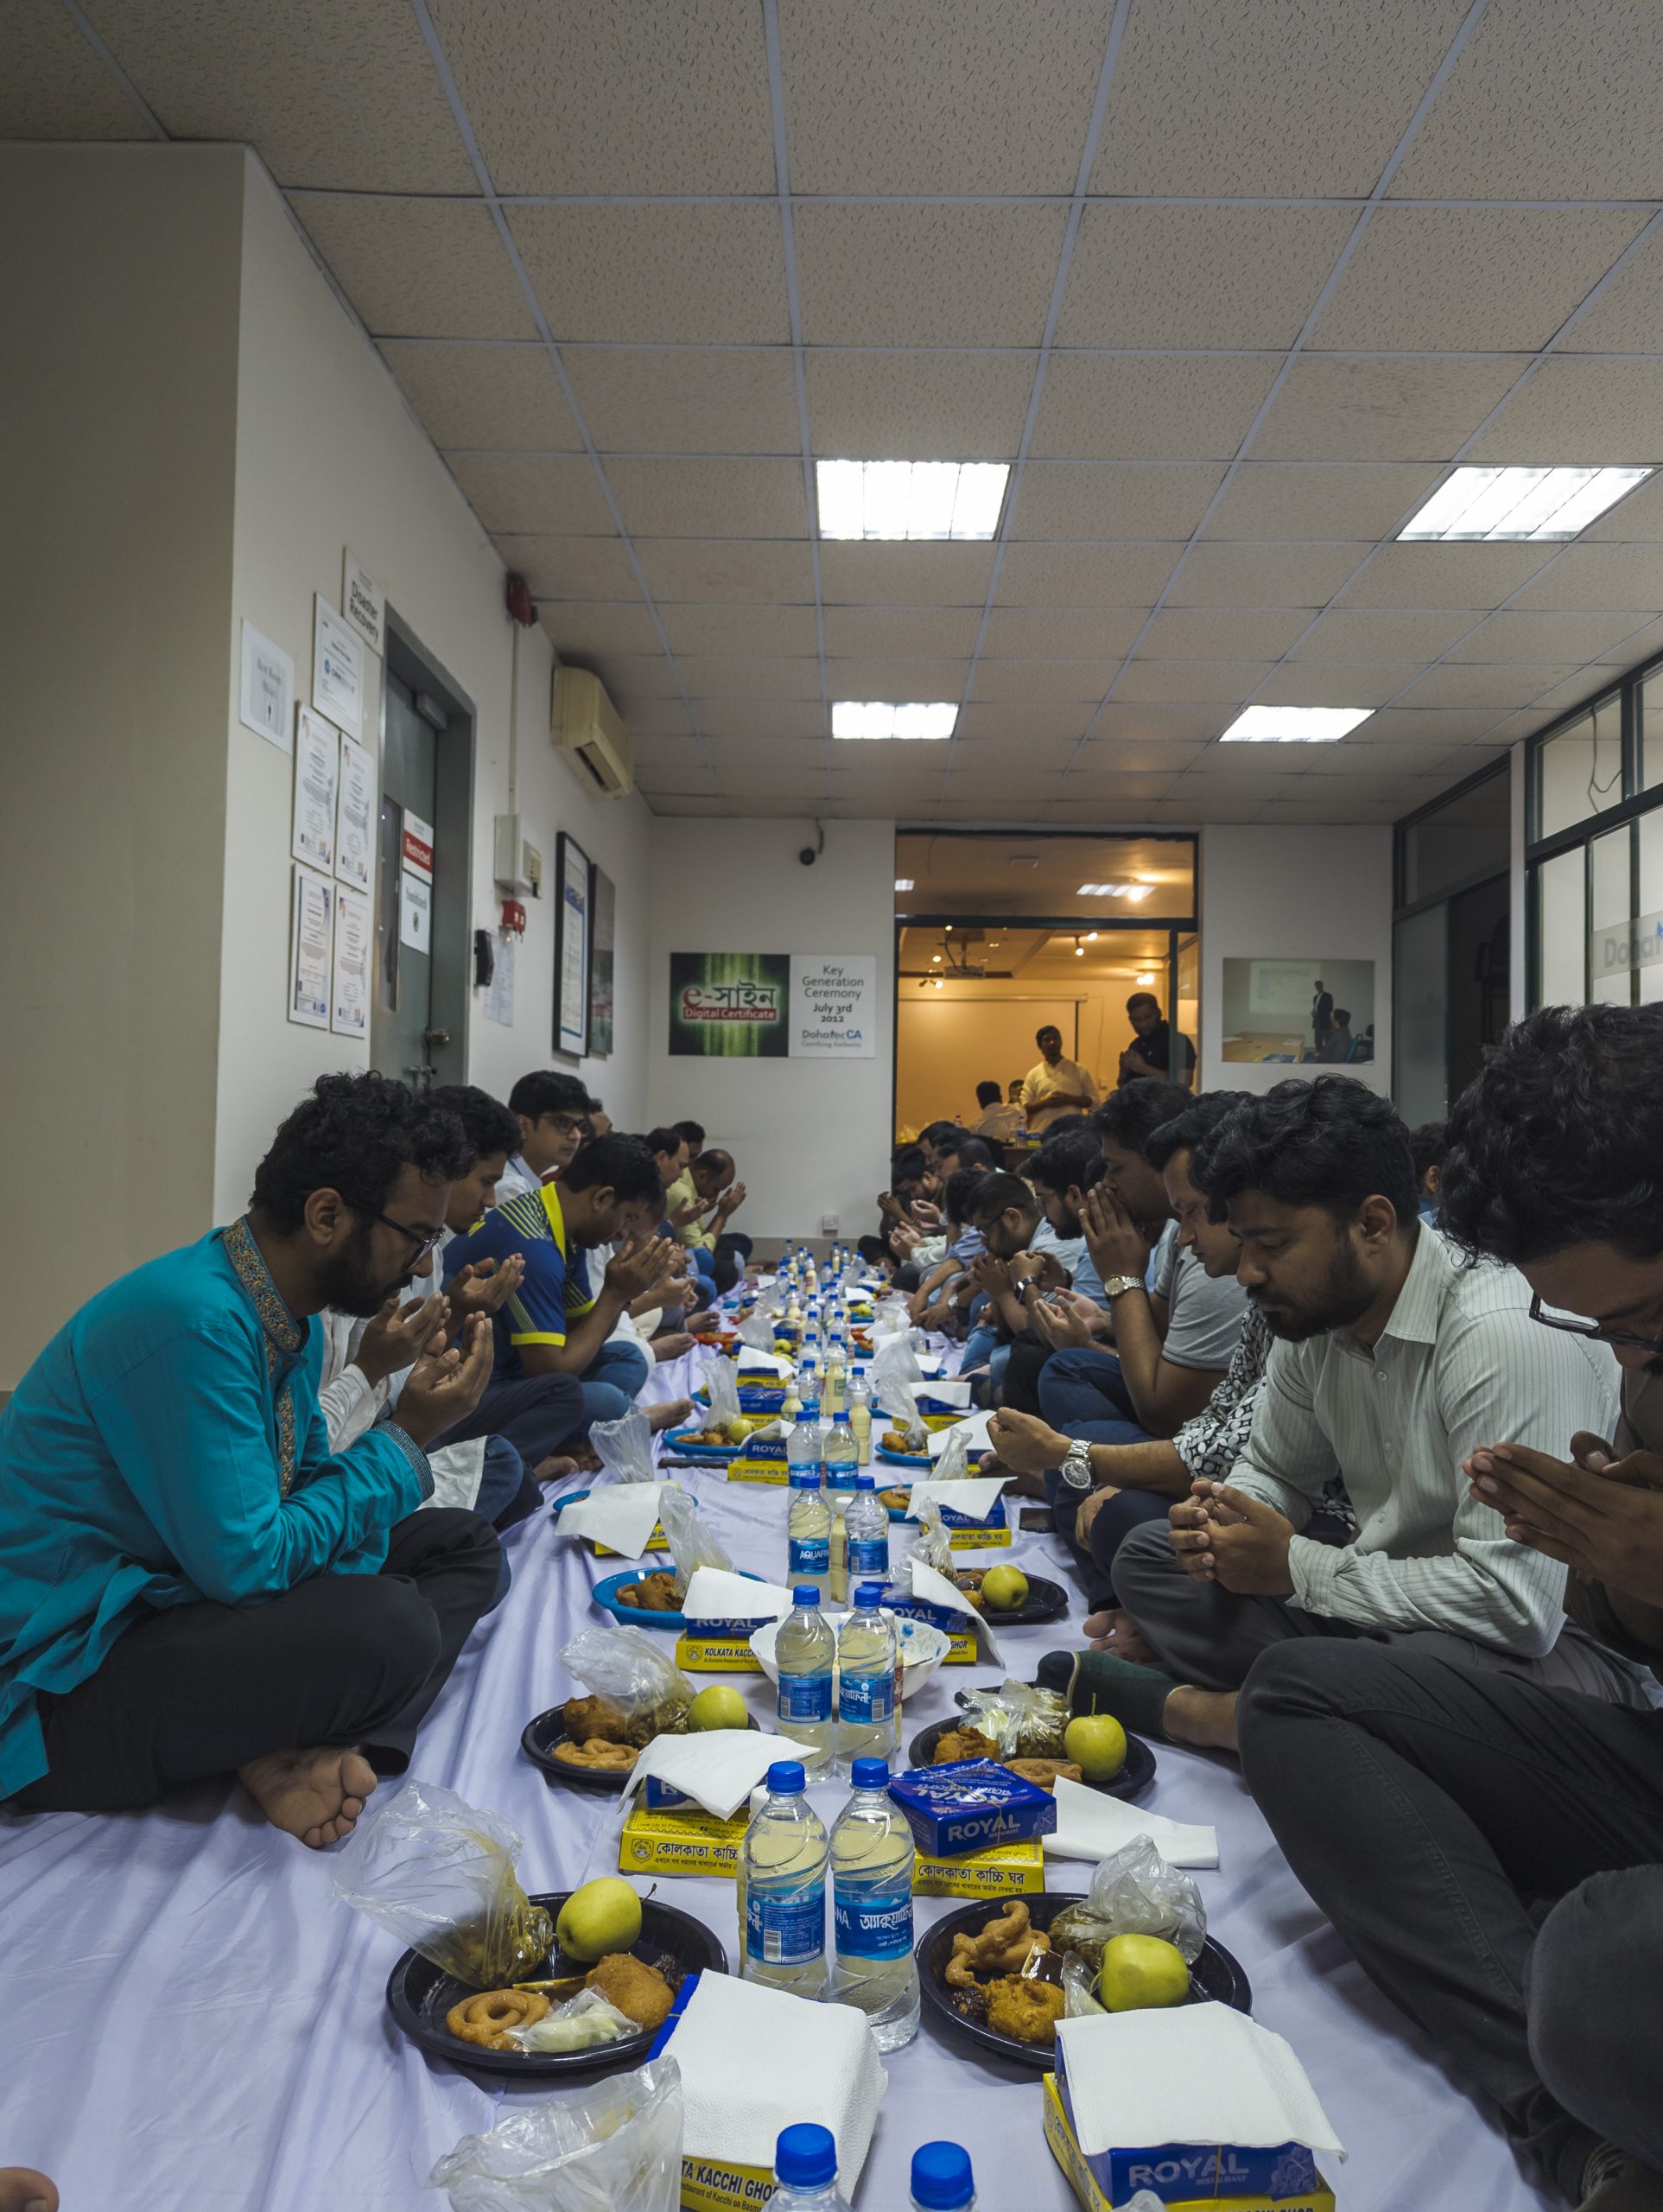 Dohatec’s Iftar Mahfil: An Evening of Community and Connection